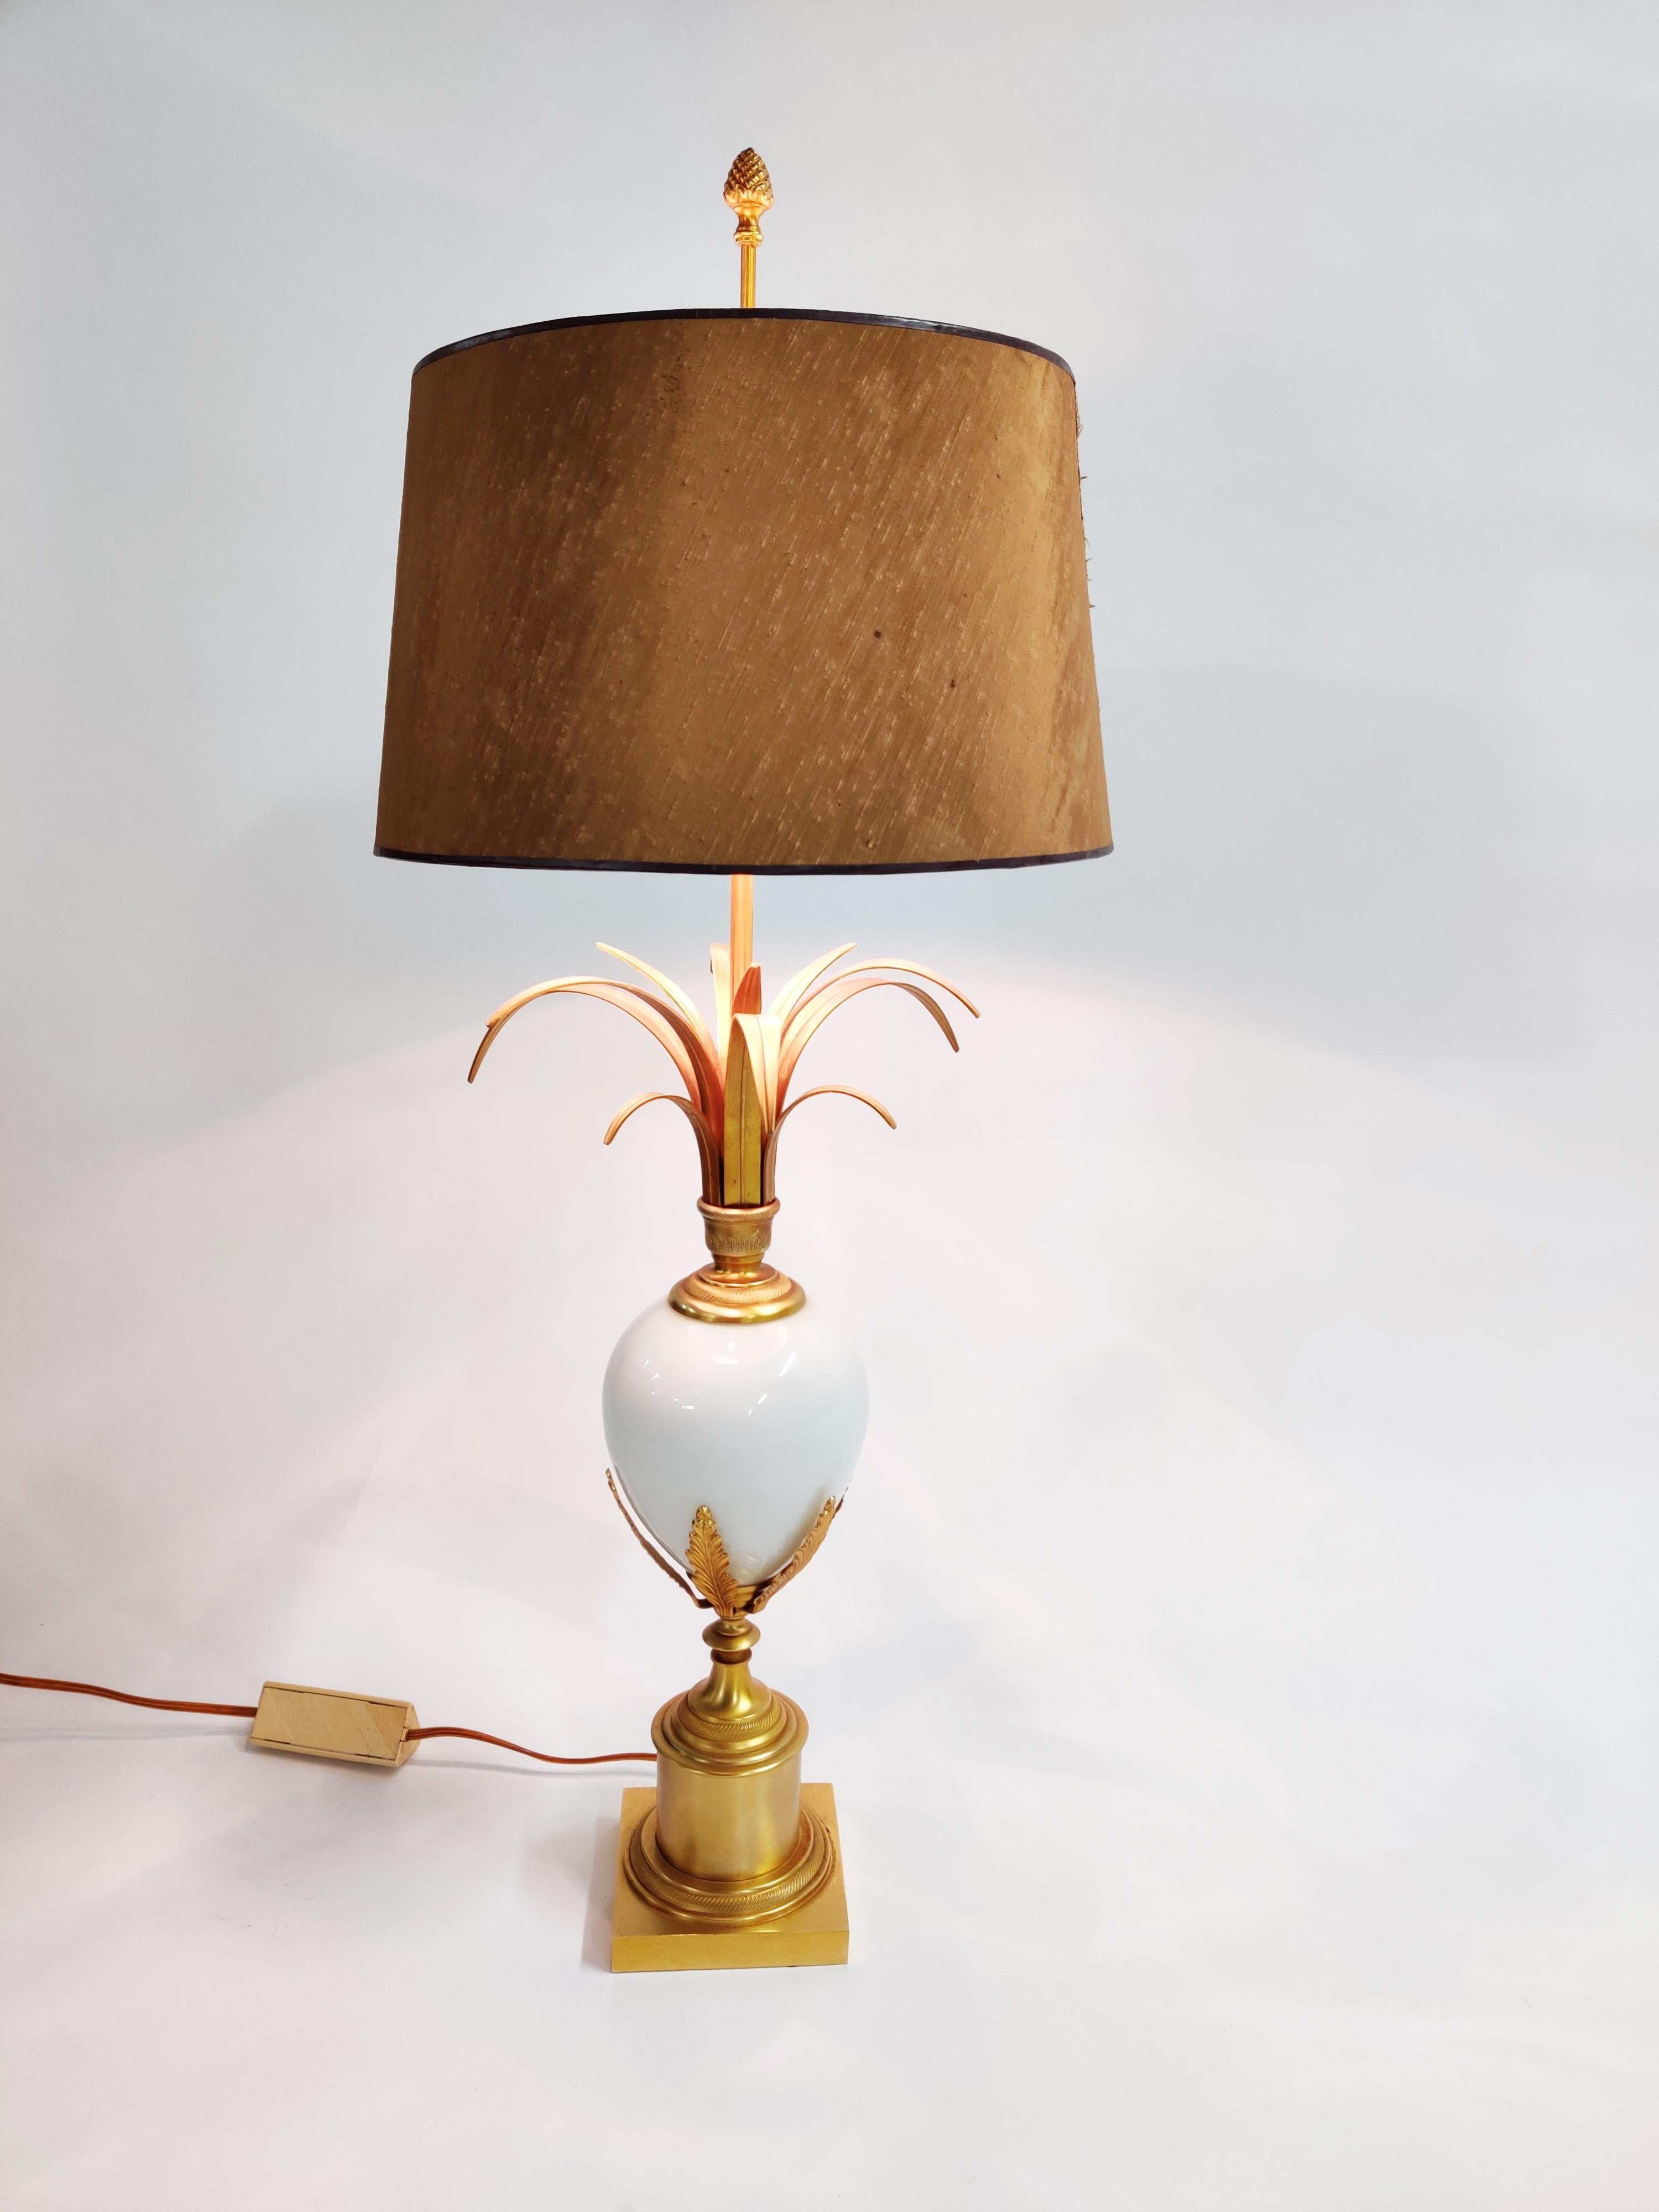 Pineapple leaf table lamp by Boulanger attributed to maison charles, rare model with an opaline globe.

This regency style lamp is also known as 'lampe vase' and is an attractive design from the 1960s.

The three-light point lamp is made from